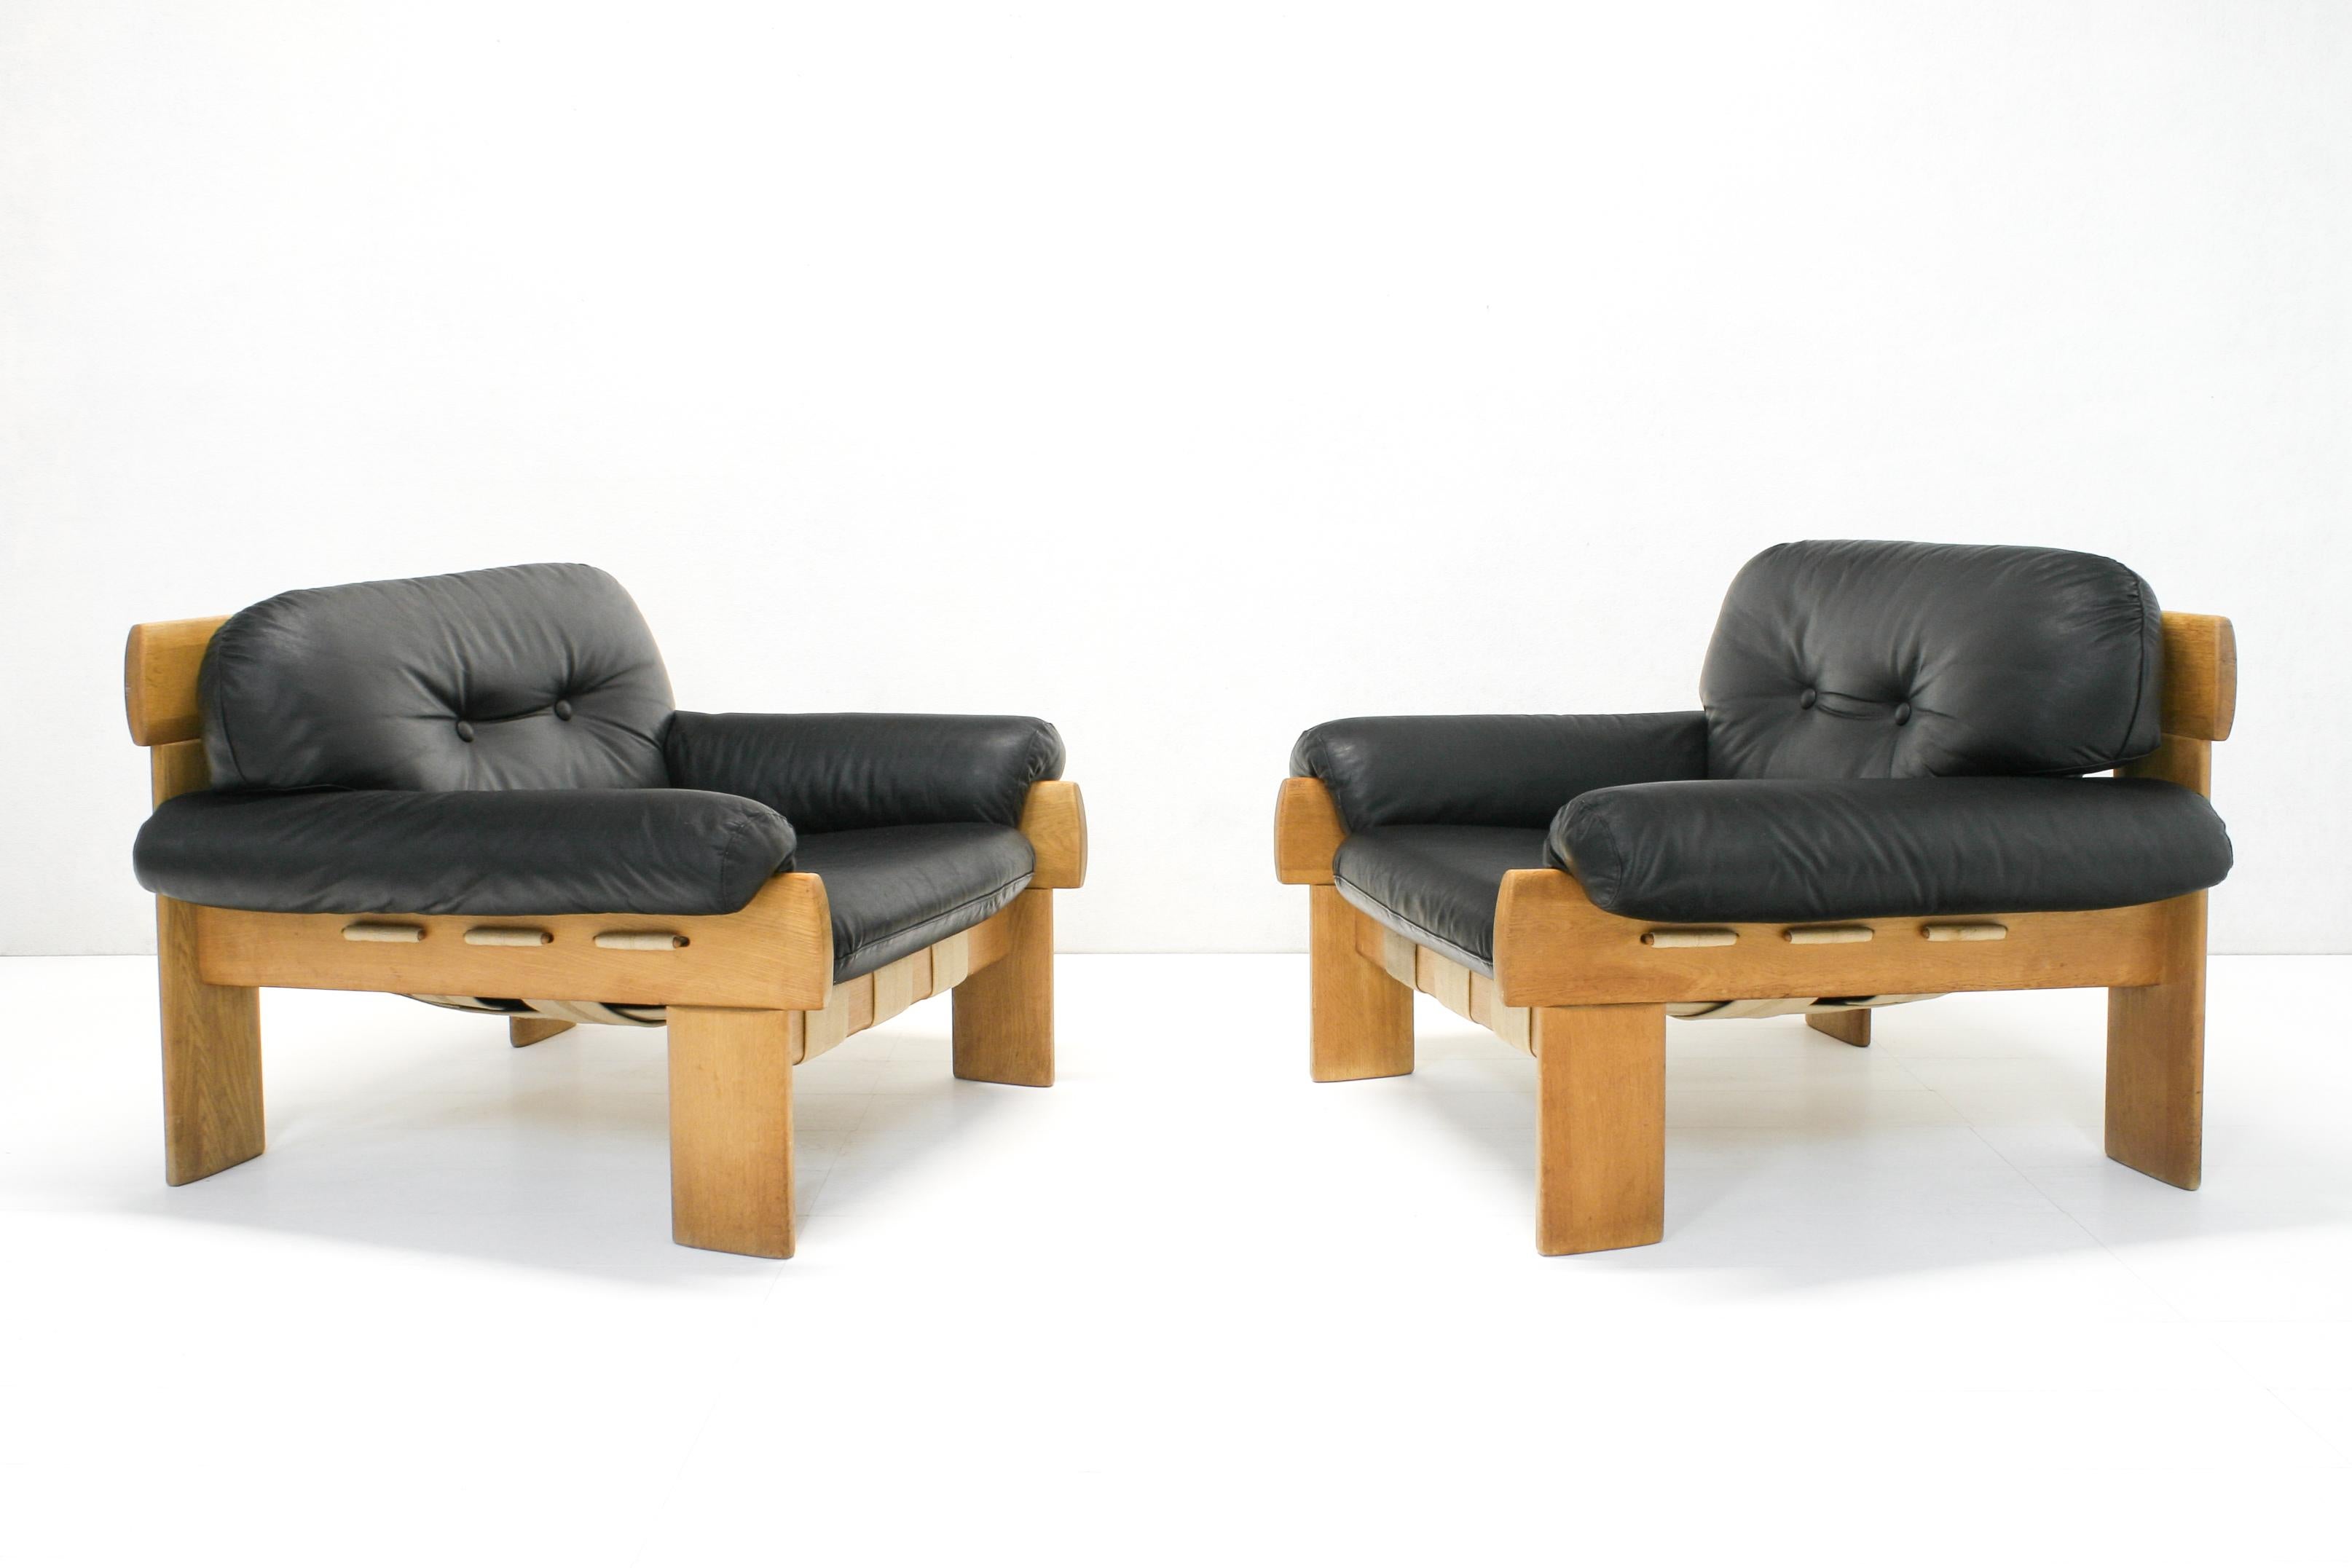 Oak and Leather Africa Armchairs and Sofa by Esko Pajamies for Asko Oy, 1970s For Sale 9